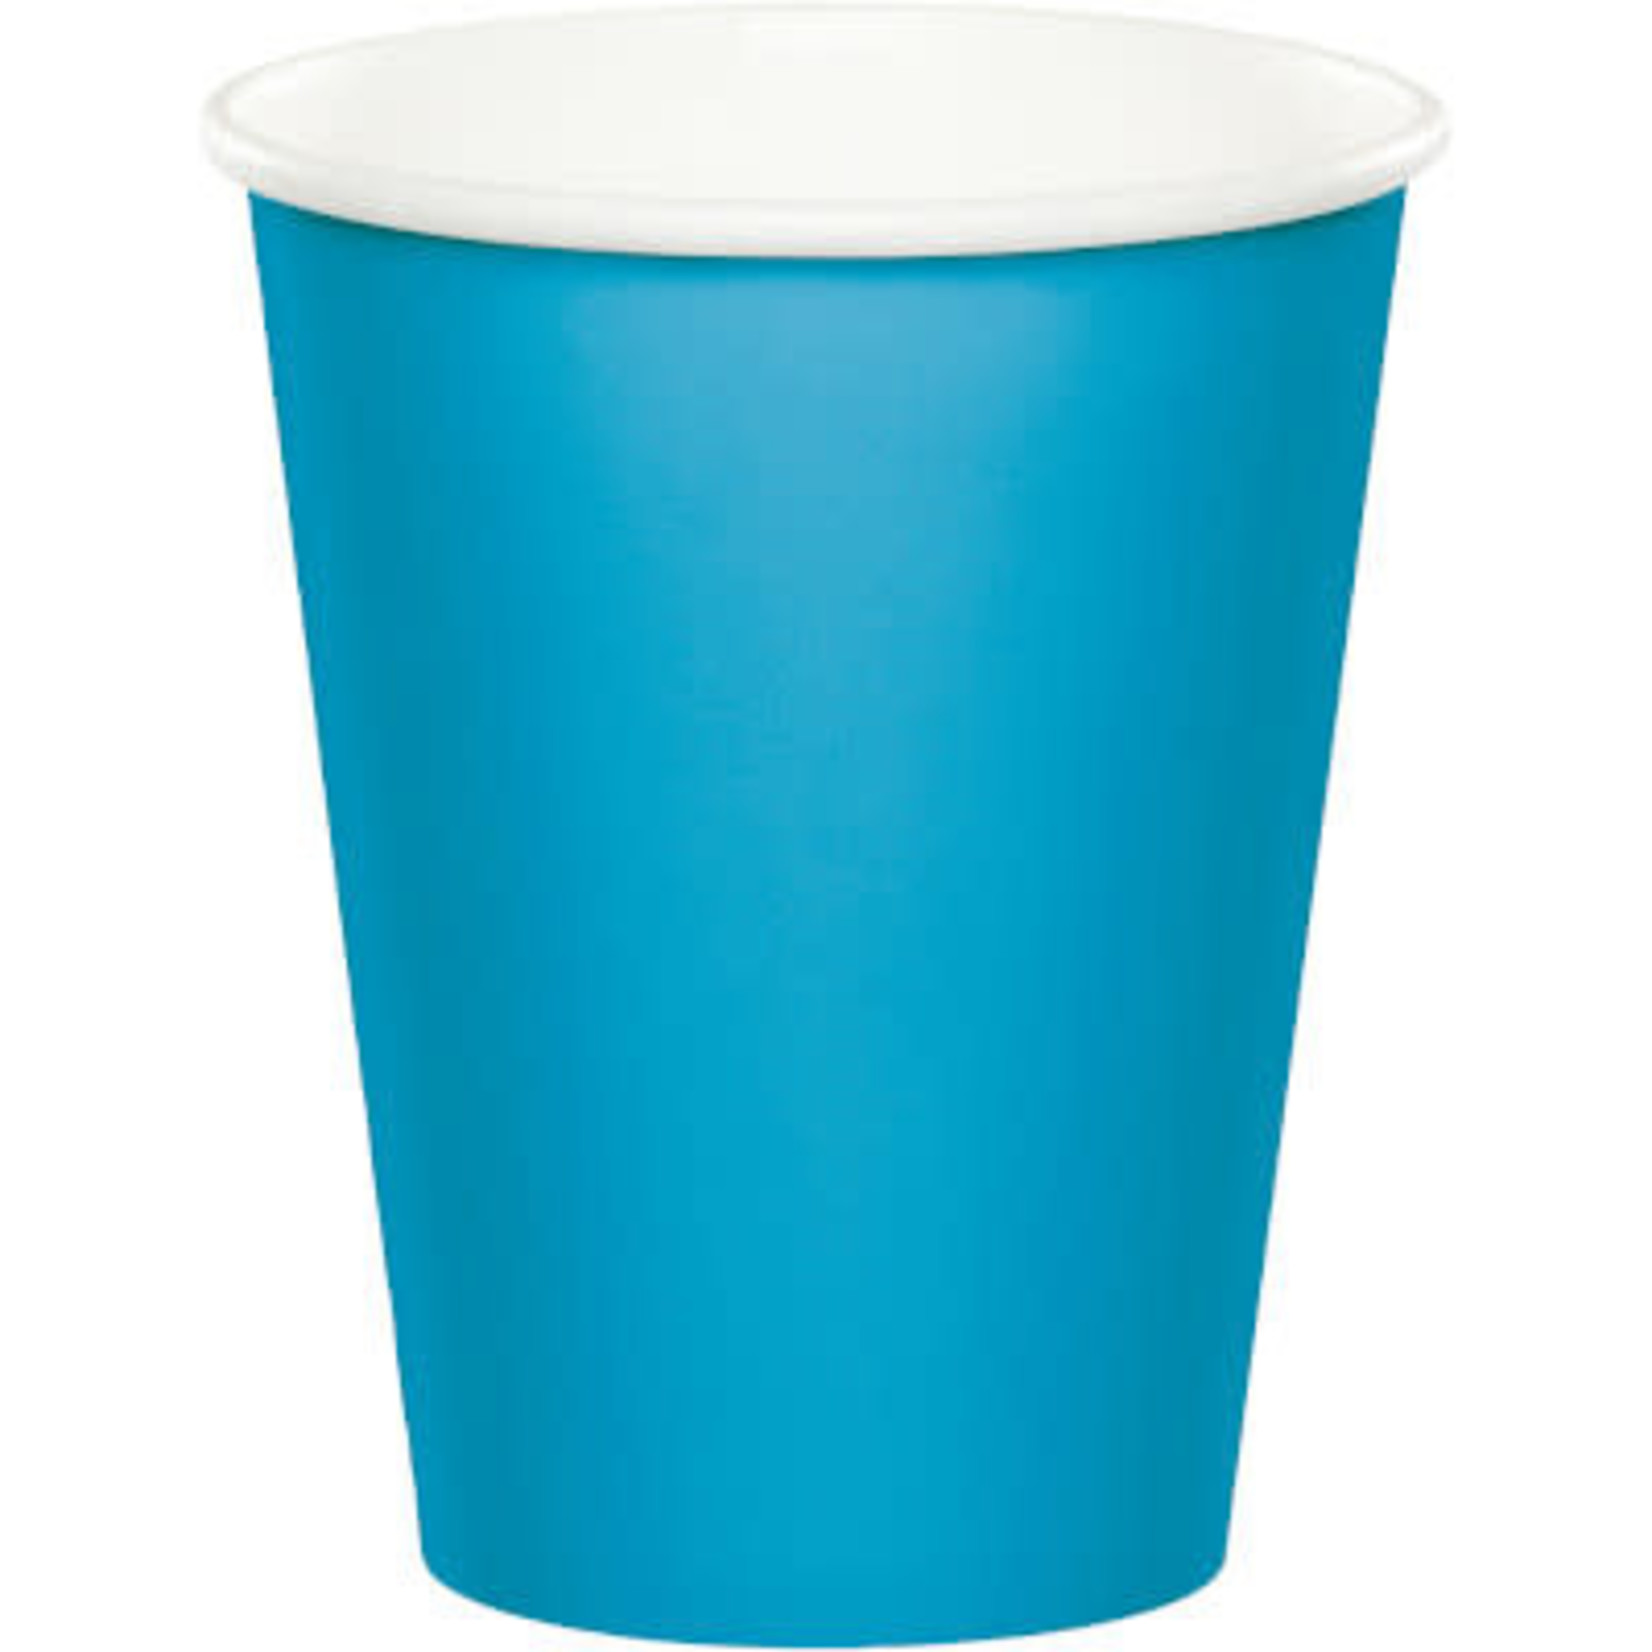 Touch of Color 9oz. Turquoise Blue Hot/Cold Paper Cups - 24ct.